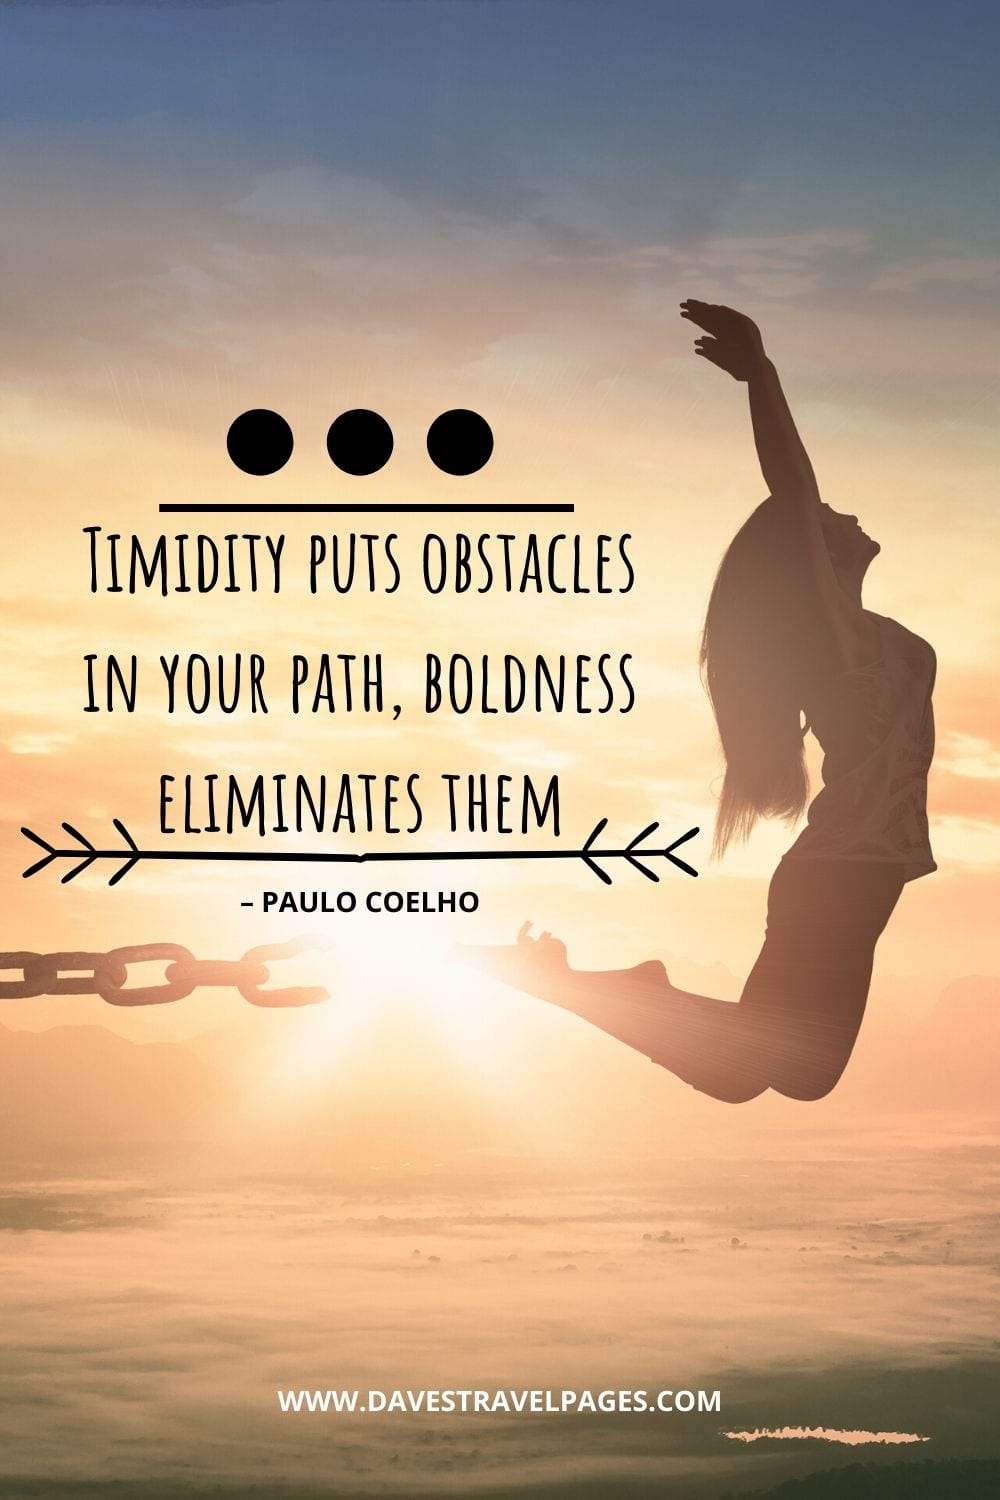 Quote about overcoming fear: “Timidity puts obstacles in your path, boldness eliminates them.” – Paulo Coelho